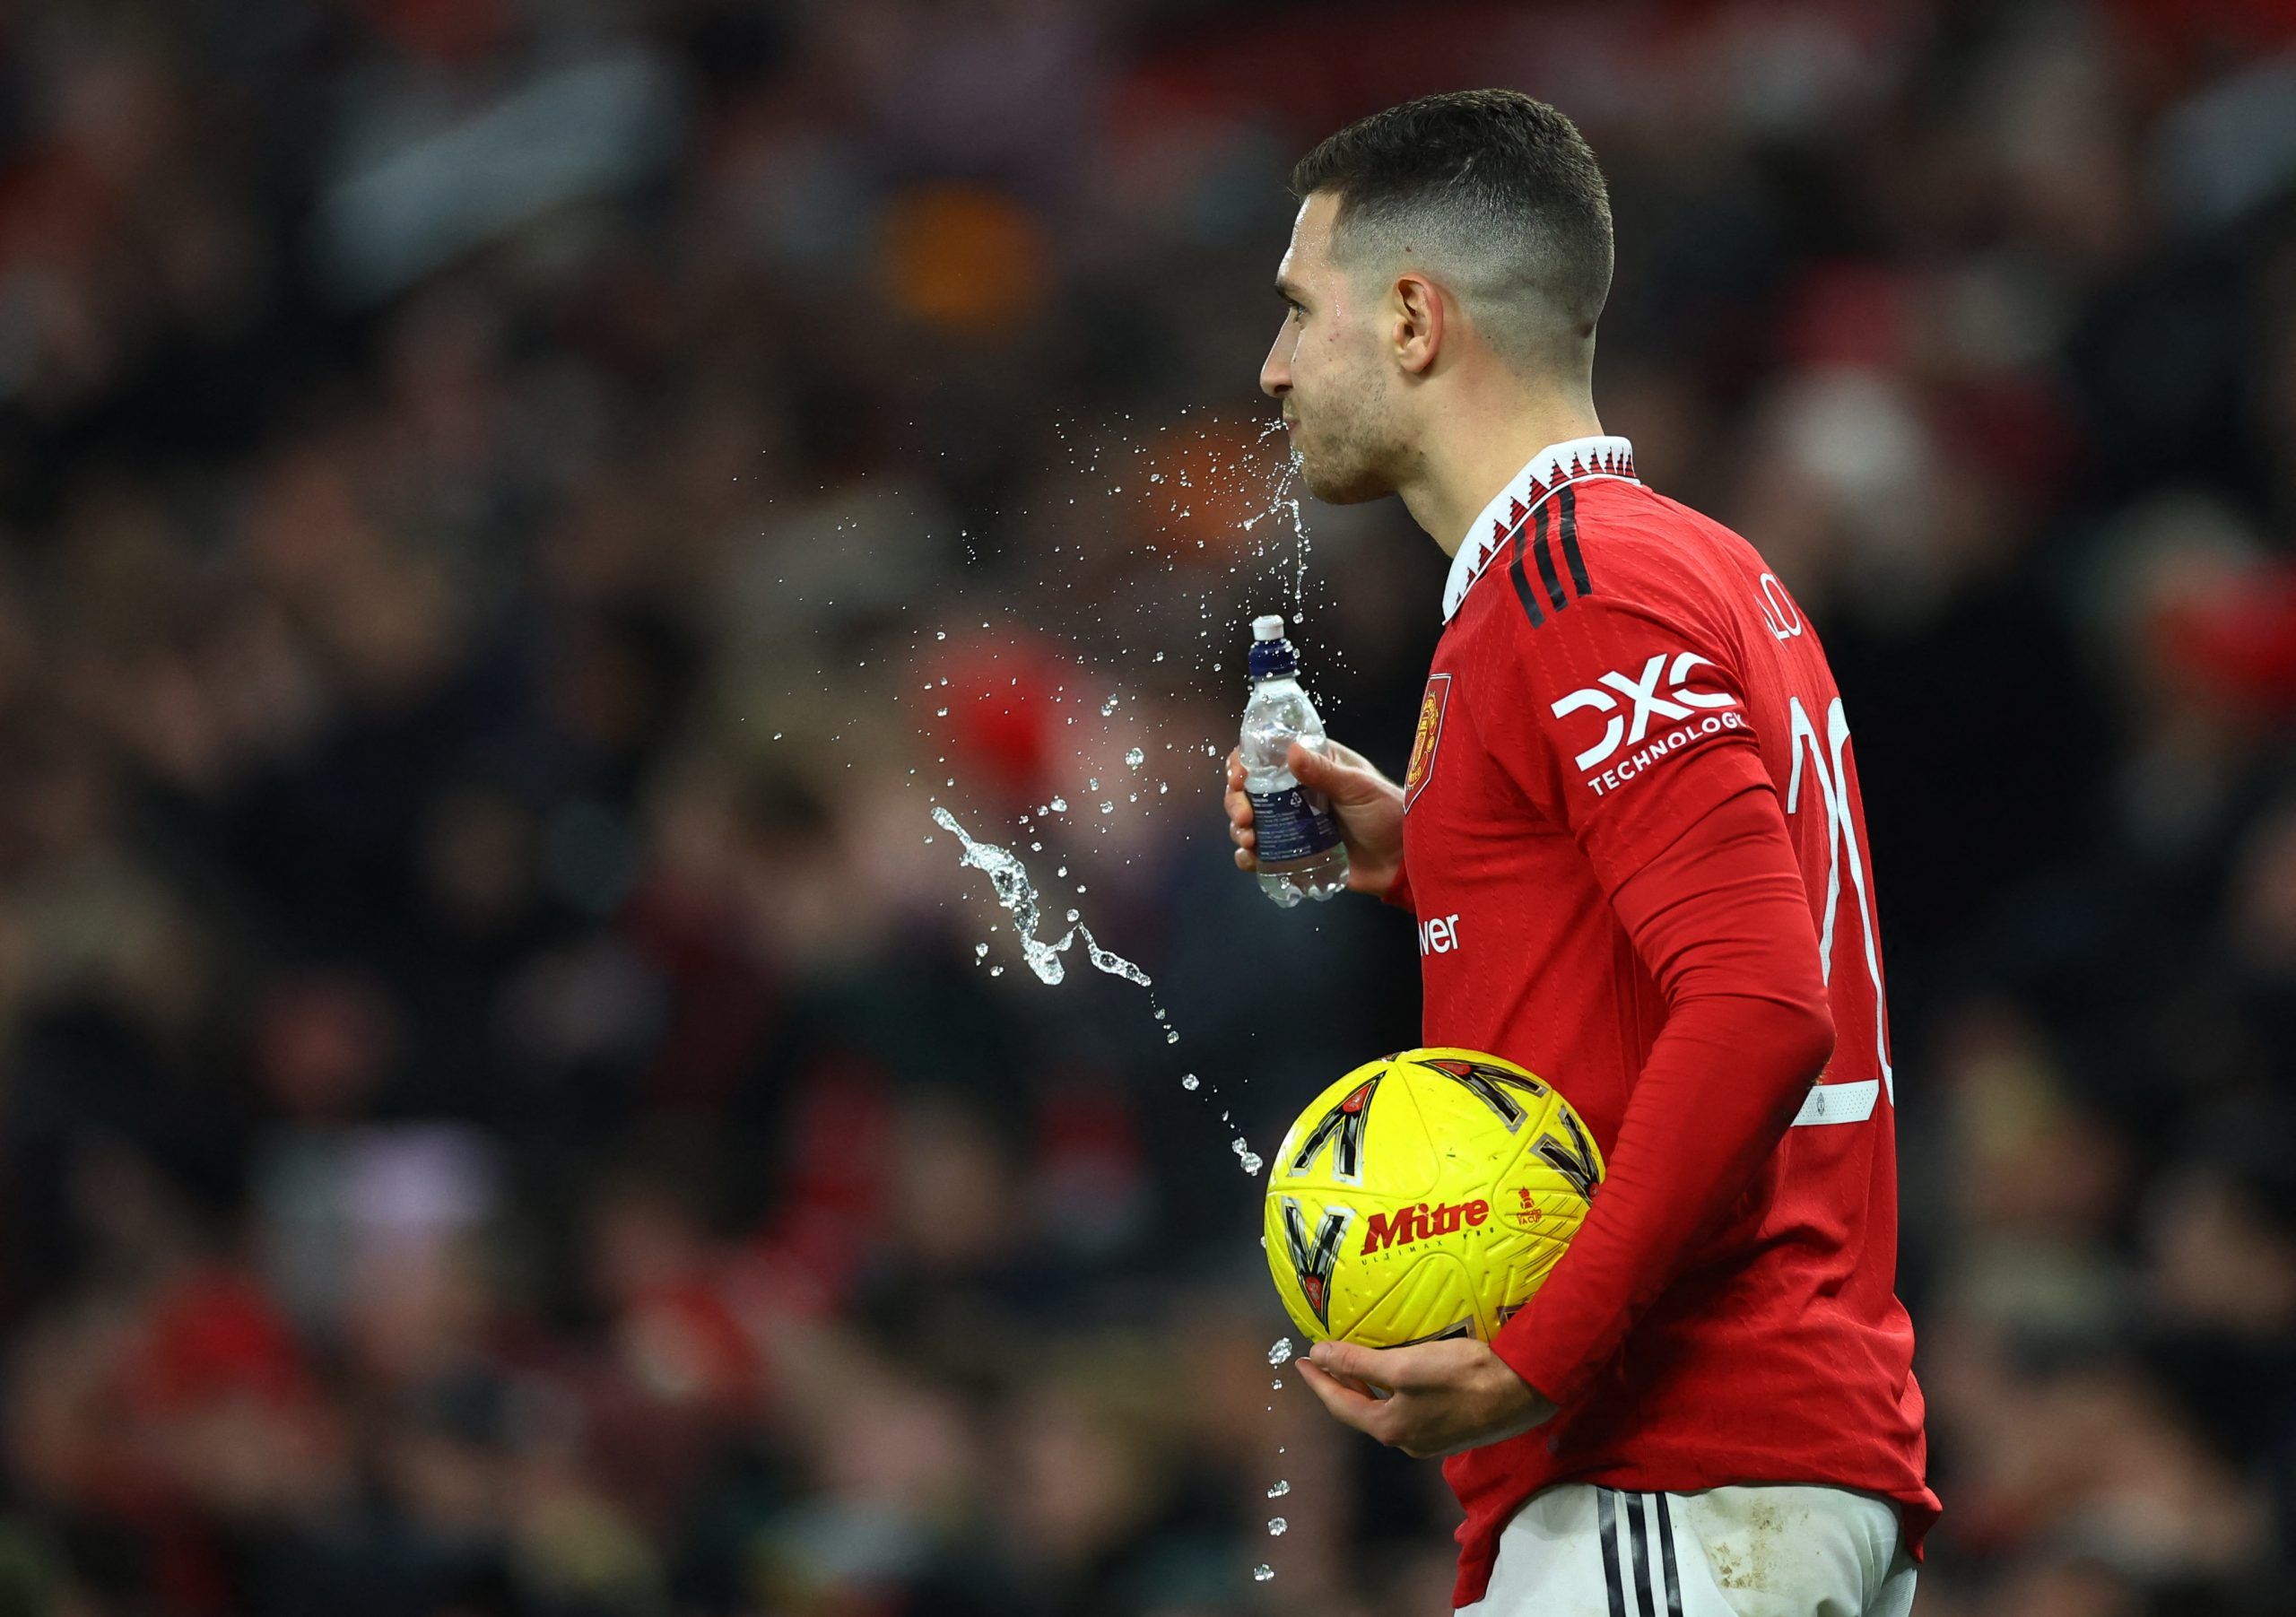 Soccer Football - FA Cup Third Round - Manchester United v Everton - Old Trafford, Manchester, Britain - January 6, 2023 Manchester United's Diogo Dalot spits out water during the match REUTERS/Carl Recine